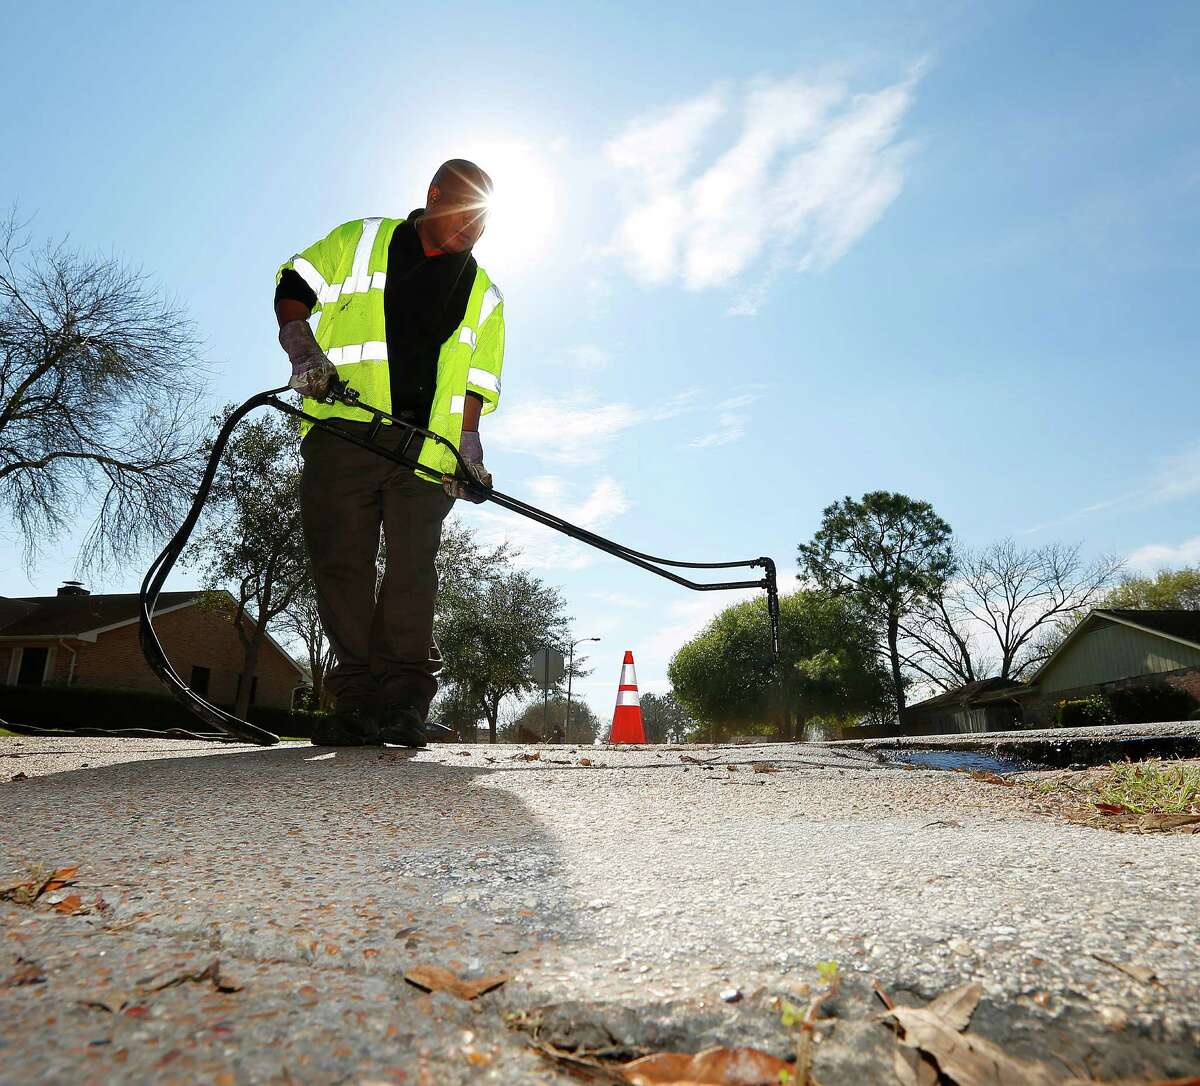 Timothy Drones sprays SS-1, an emulsion which helps asphalt adhere to the road, over an area his City of Houston road crew is about to patch at the corner of Belle Park Drive and Bandlon Drive, Tuesday, Jan. 5, 2016, in Houston.